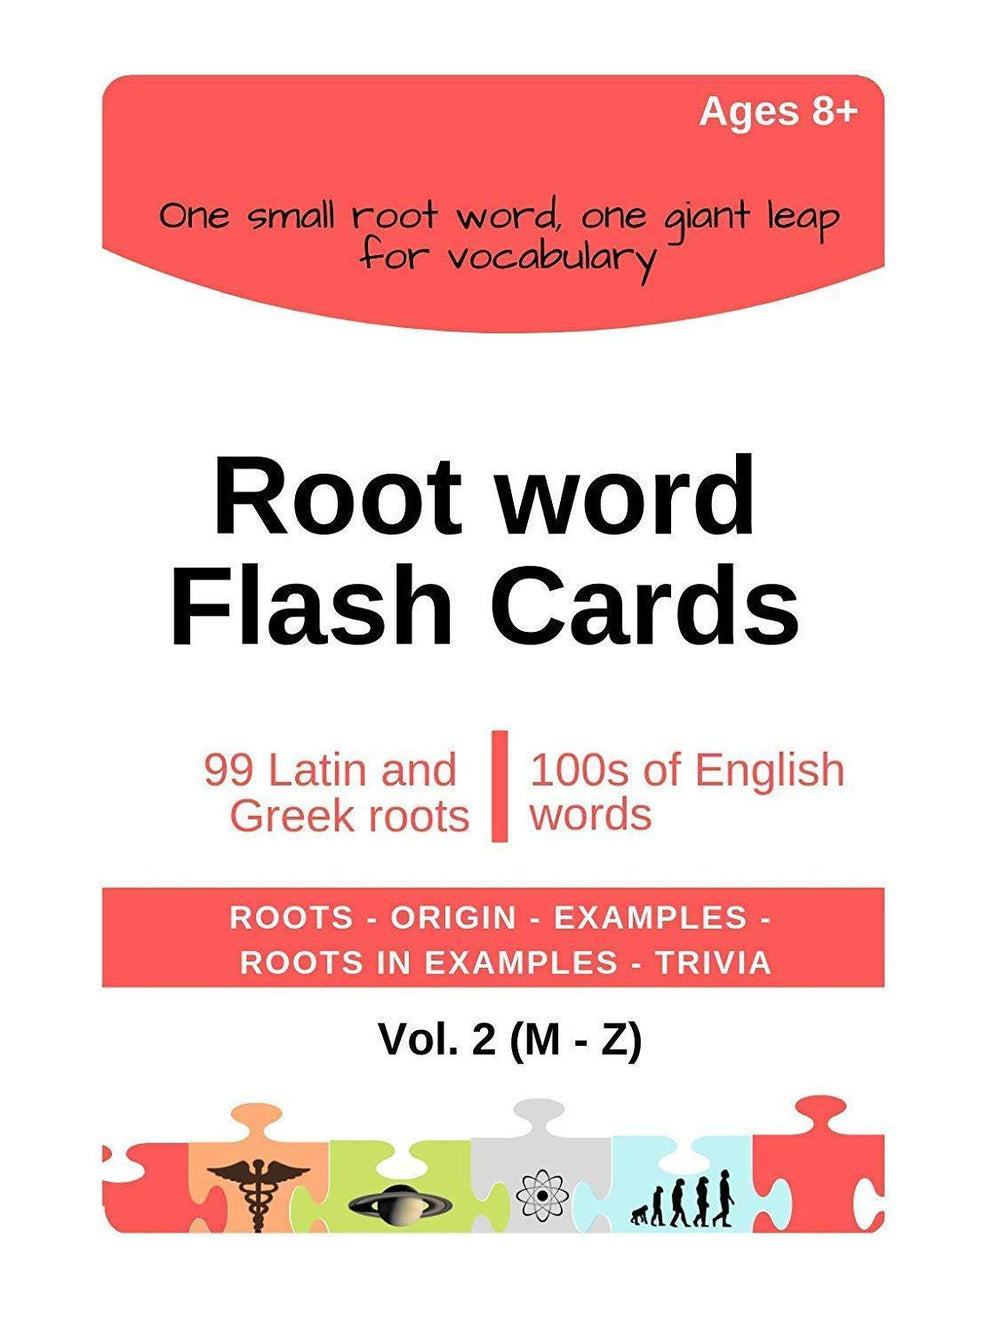 Lilliput Latin and Greek Root Words Based English Vocabulary Builder Flash Cards Vol 2 (M - Z) - BOSTON CREATIVE COMPANY